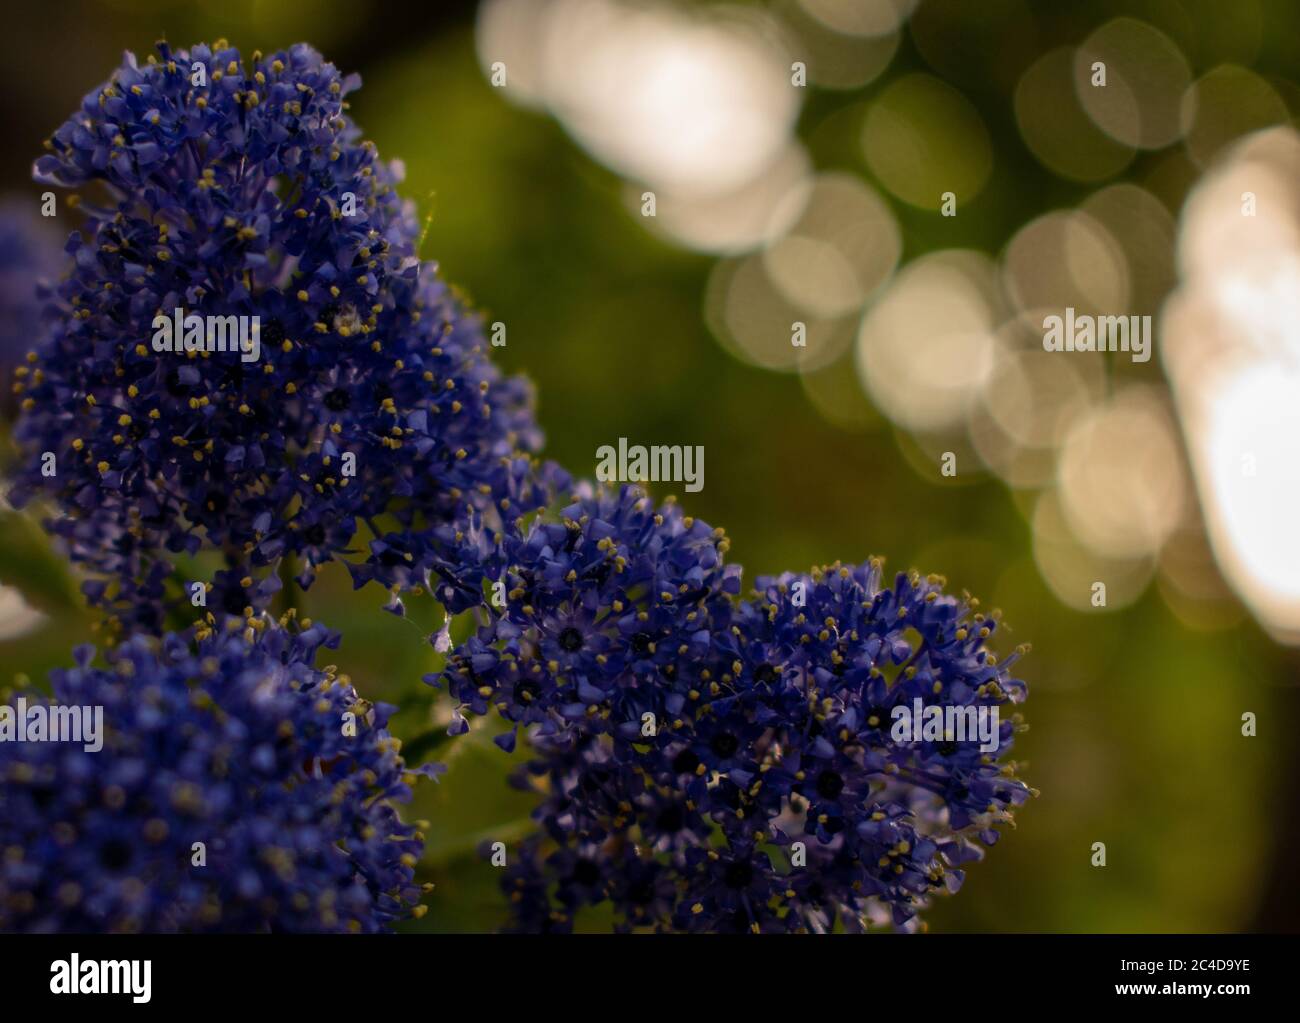 Closeup shot of a purple California Lilac flower with a blurred background Stock Photo